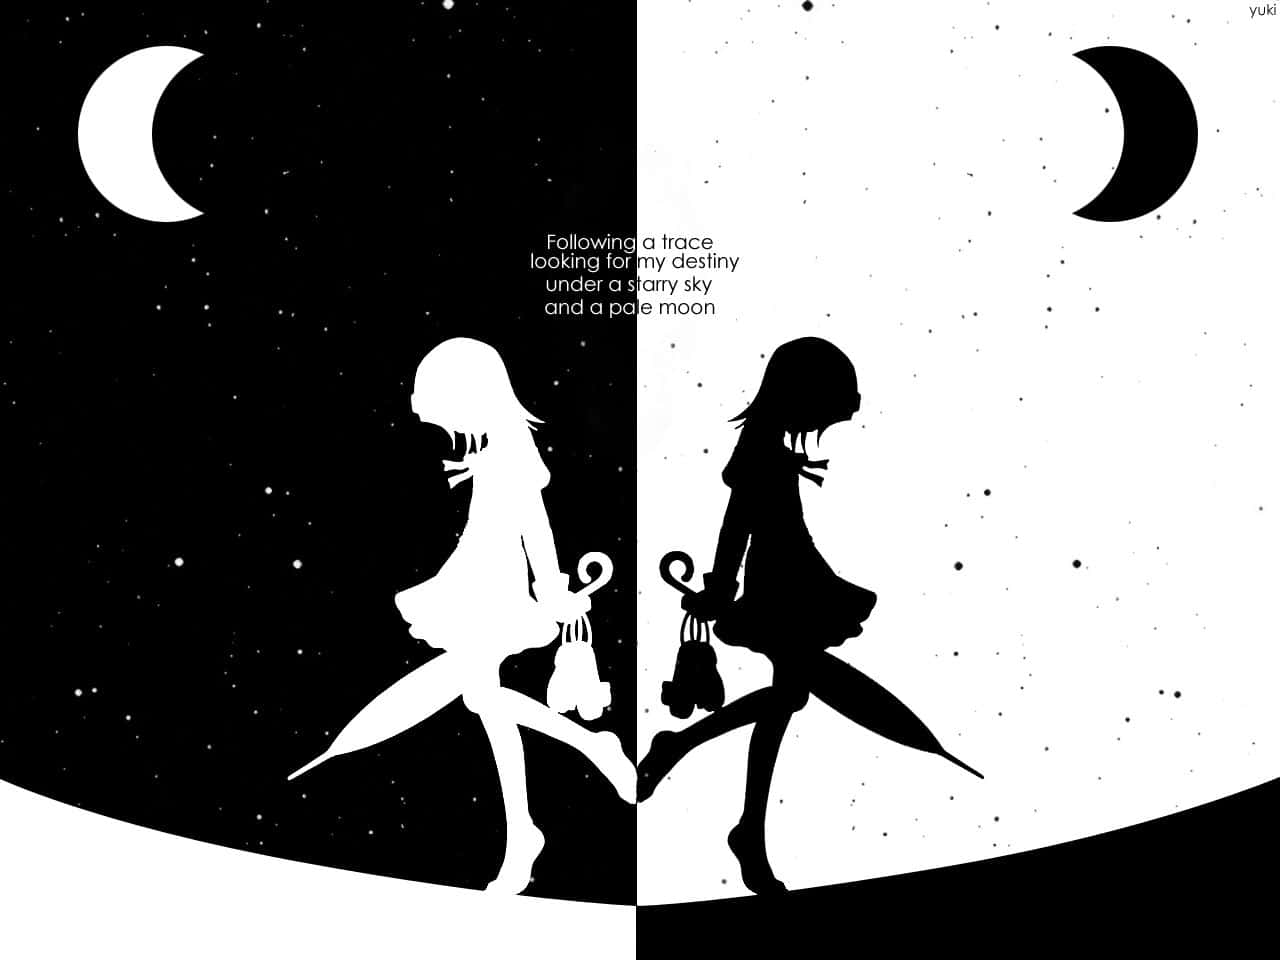 'Mix of Monochrome and Anime Dreams' Wallpaper